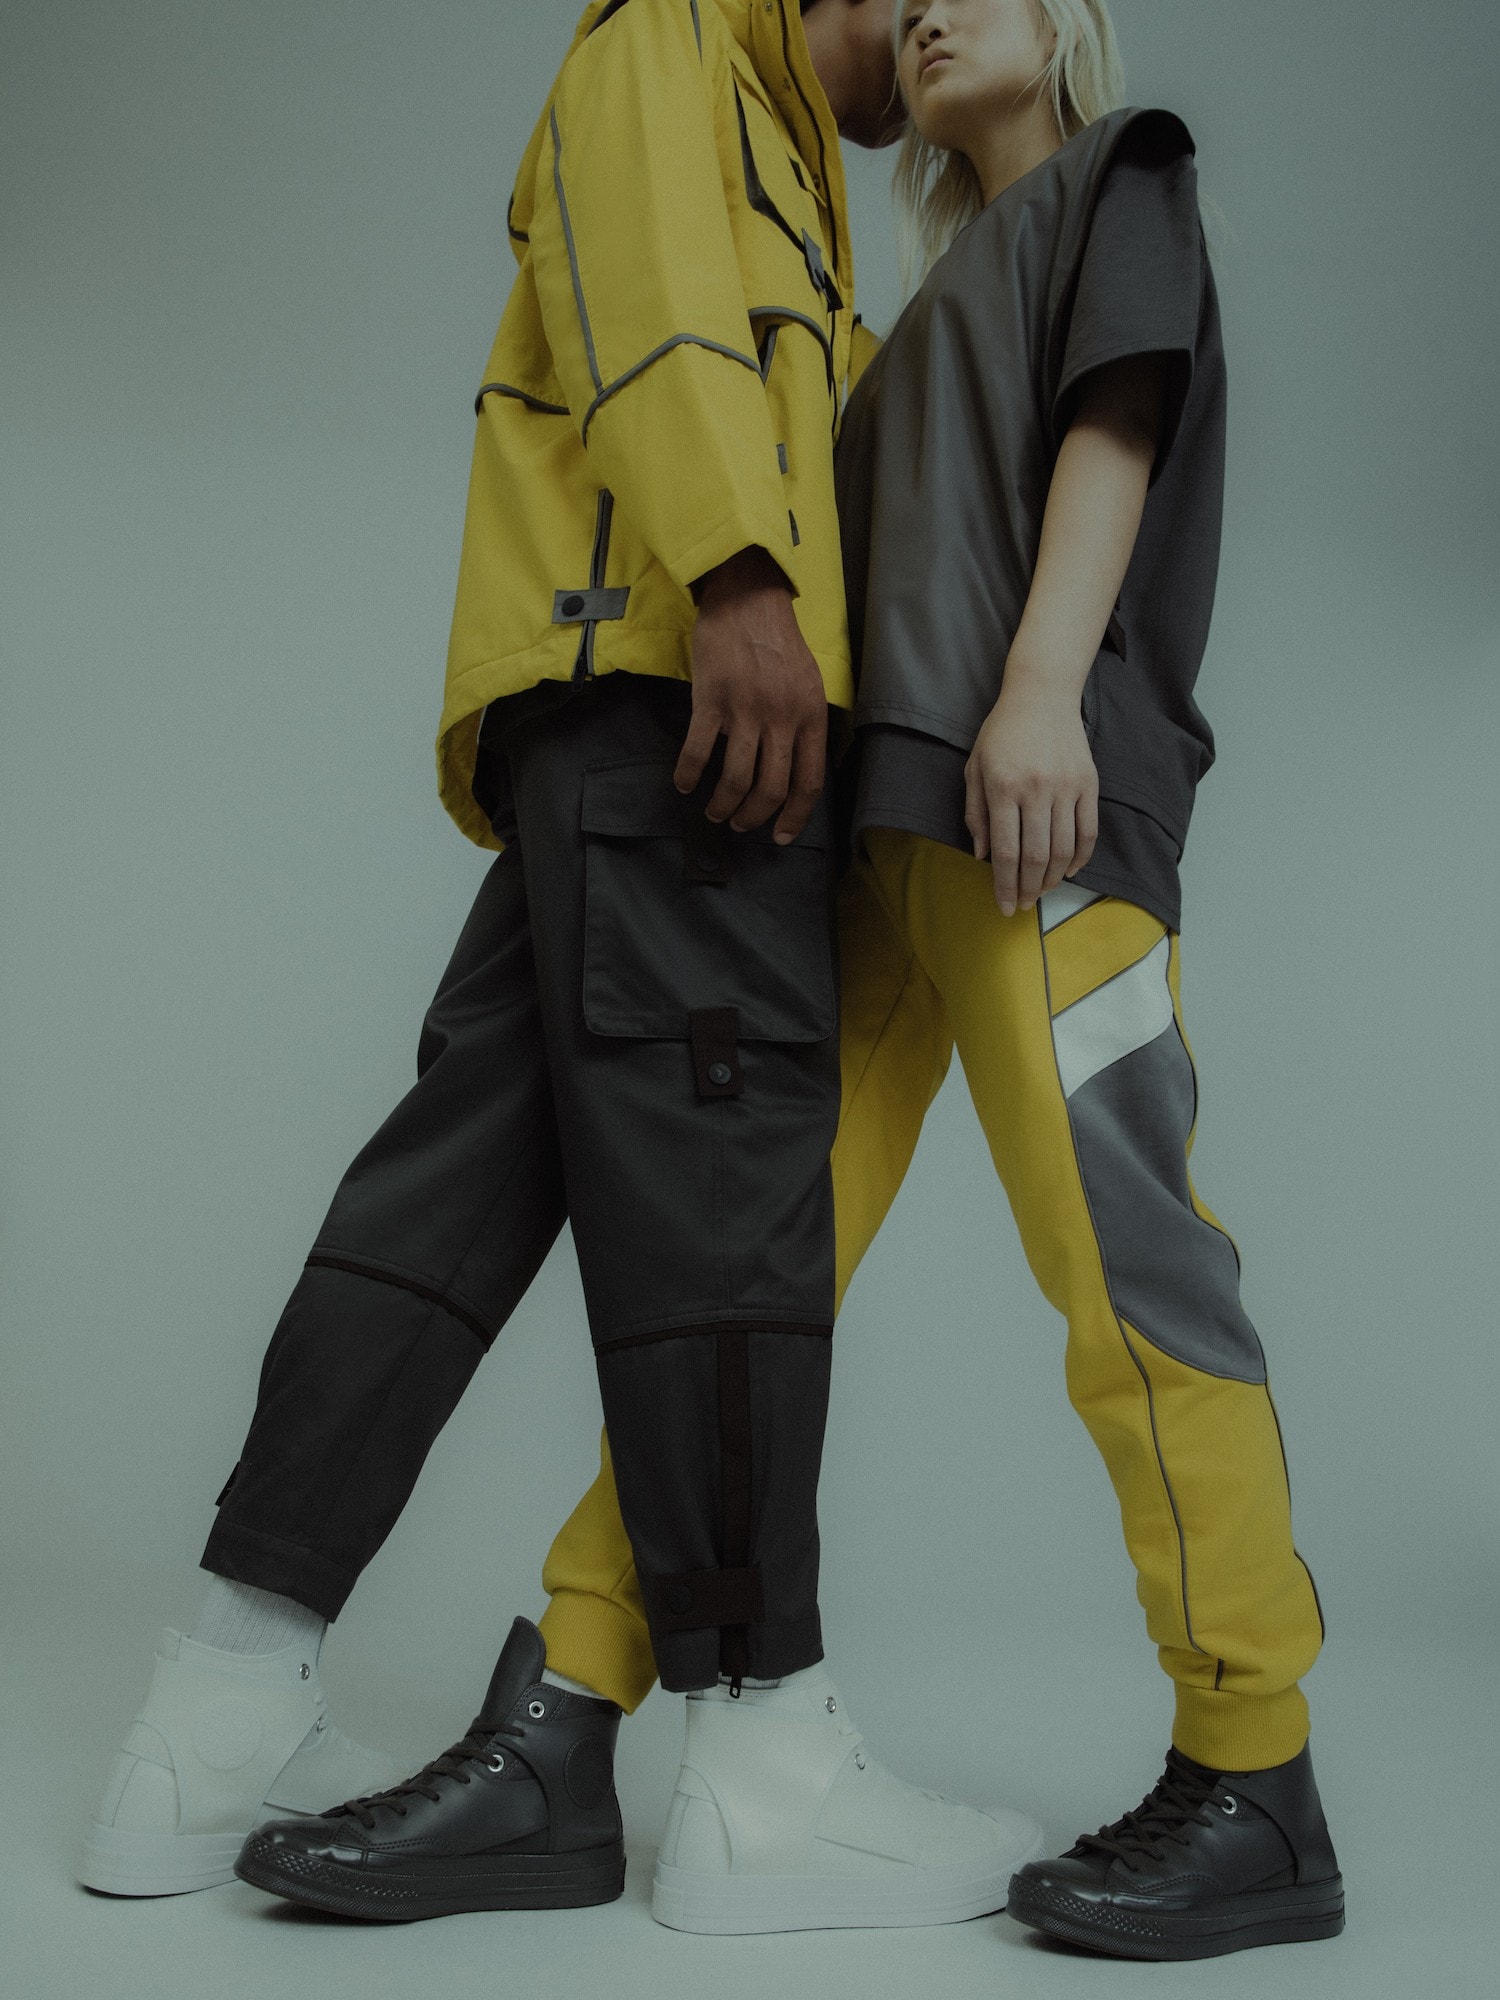 Converse by Feng Chen Wang FW19 Lookbook footwear all-star sneakers shanghai FCW China Fall Winter 2019